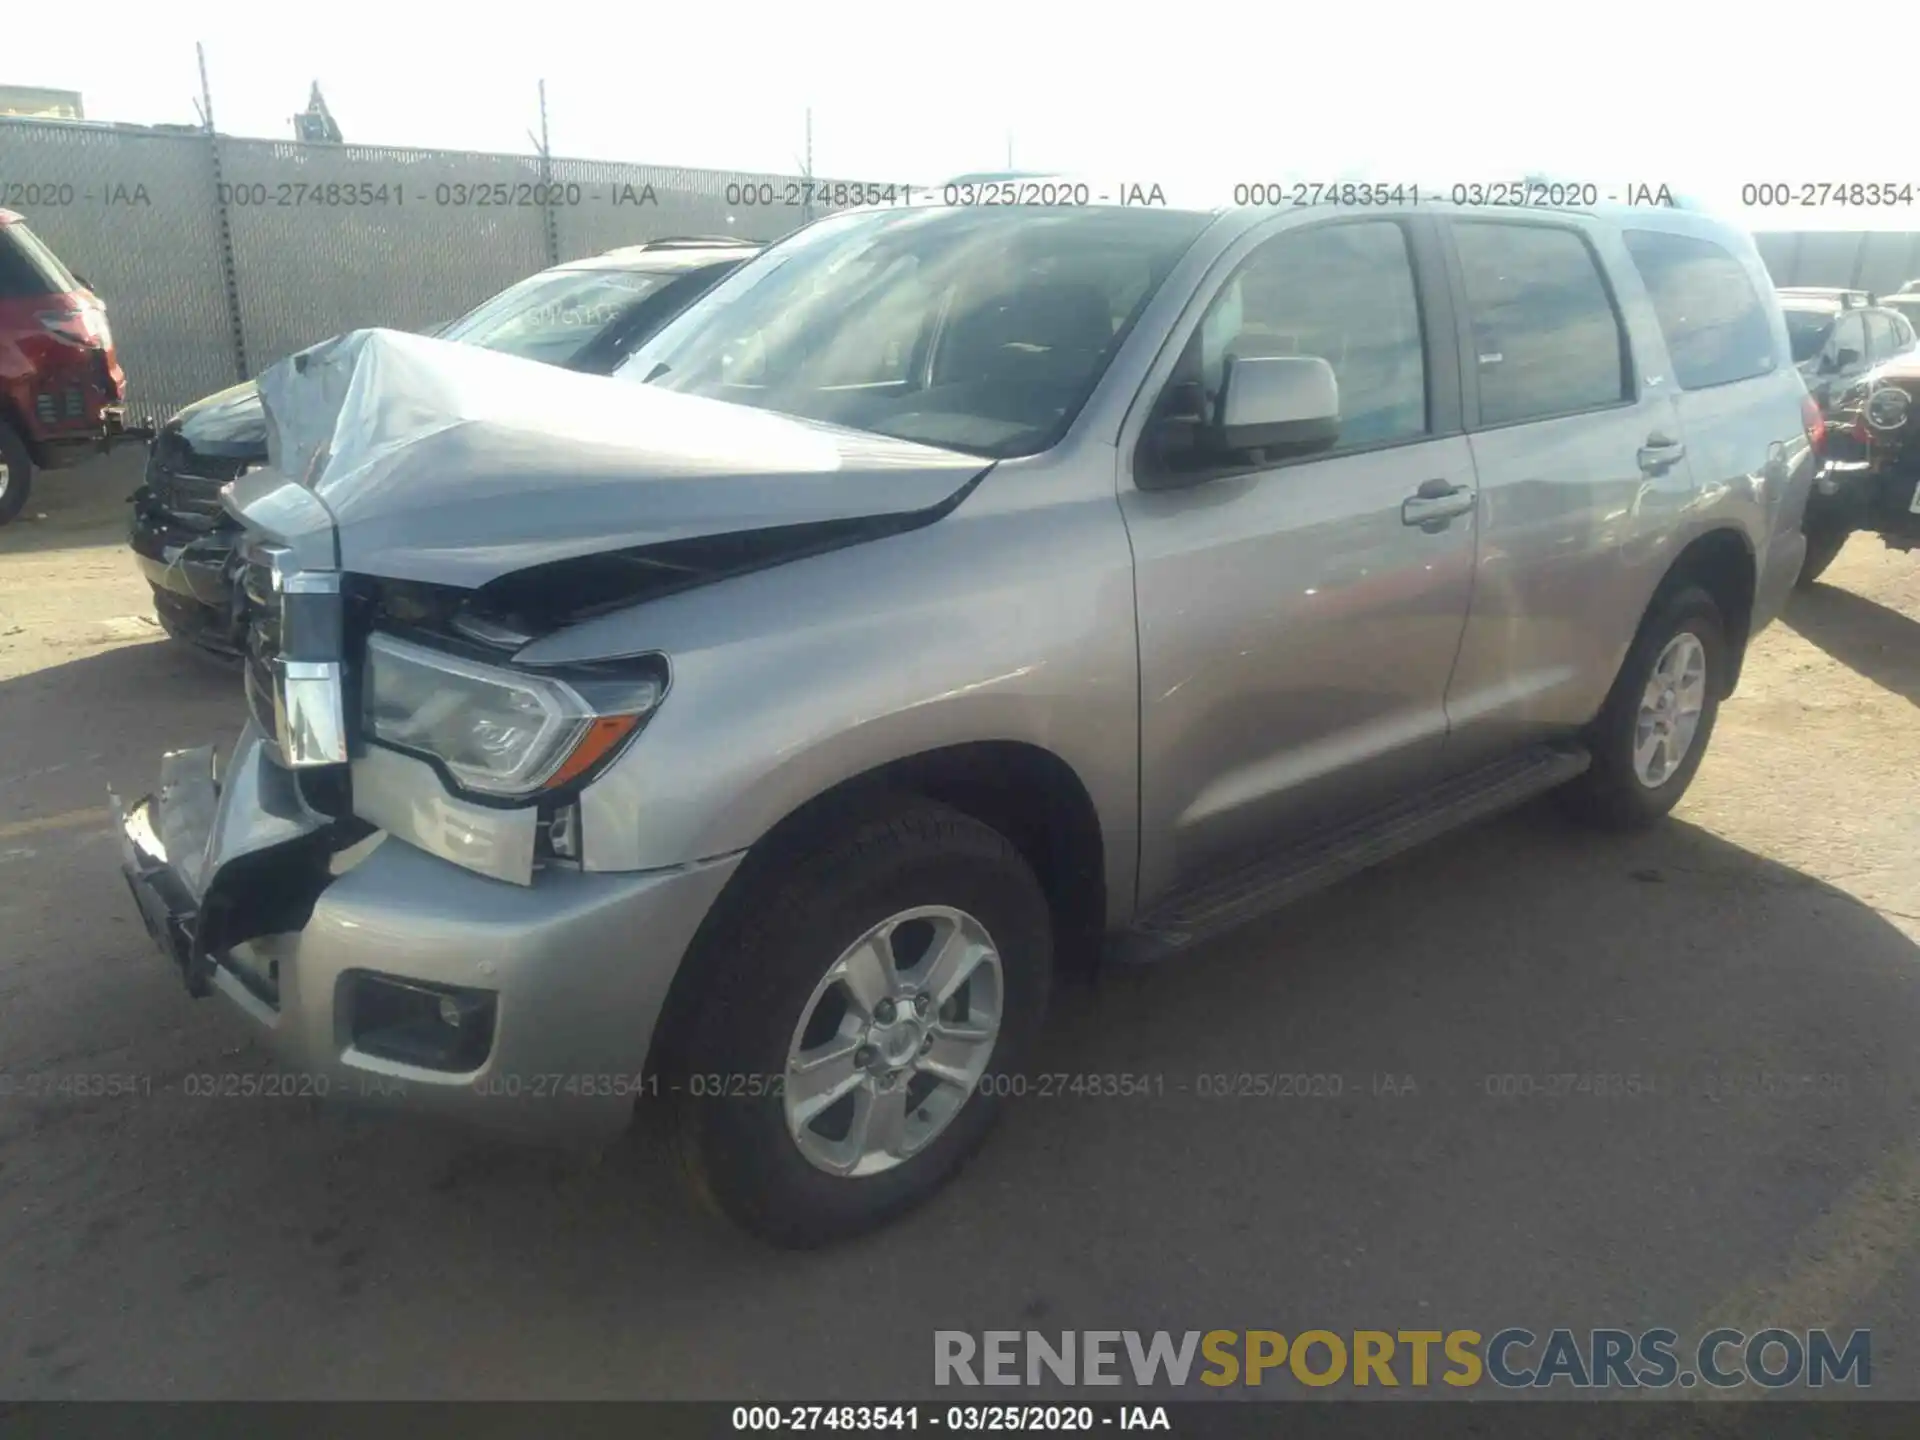 2 Photograph of a damaged car 5TDBY5G10KS169013 TOYOTA SEQUOIA 2019